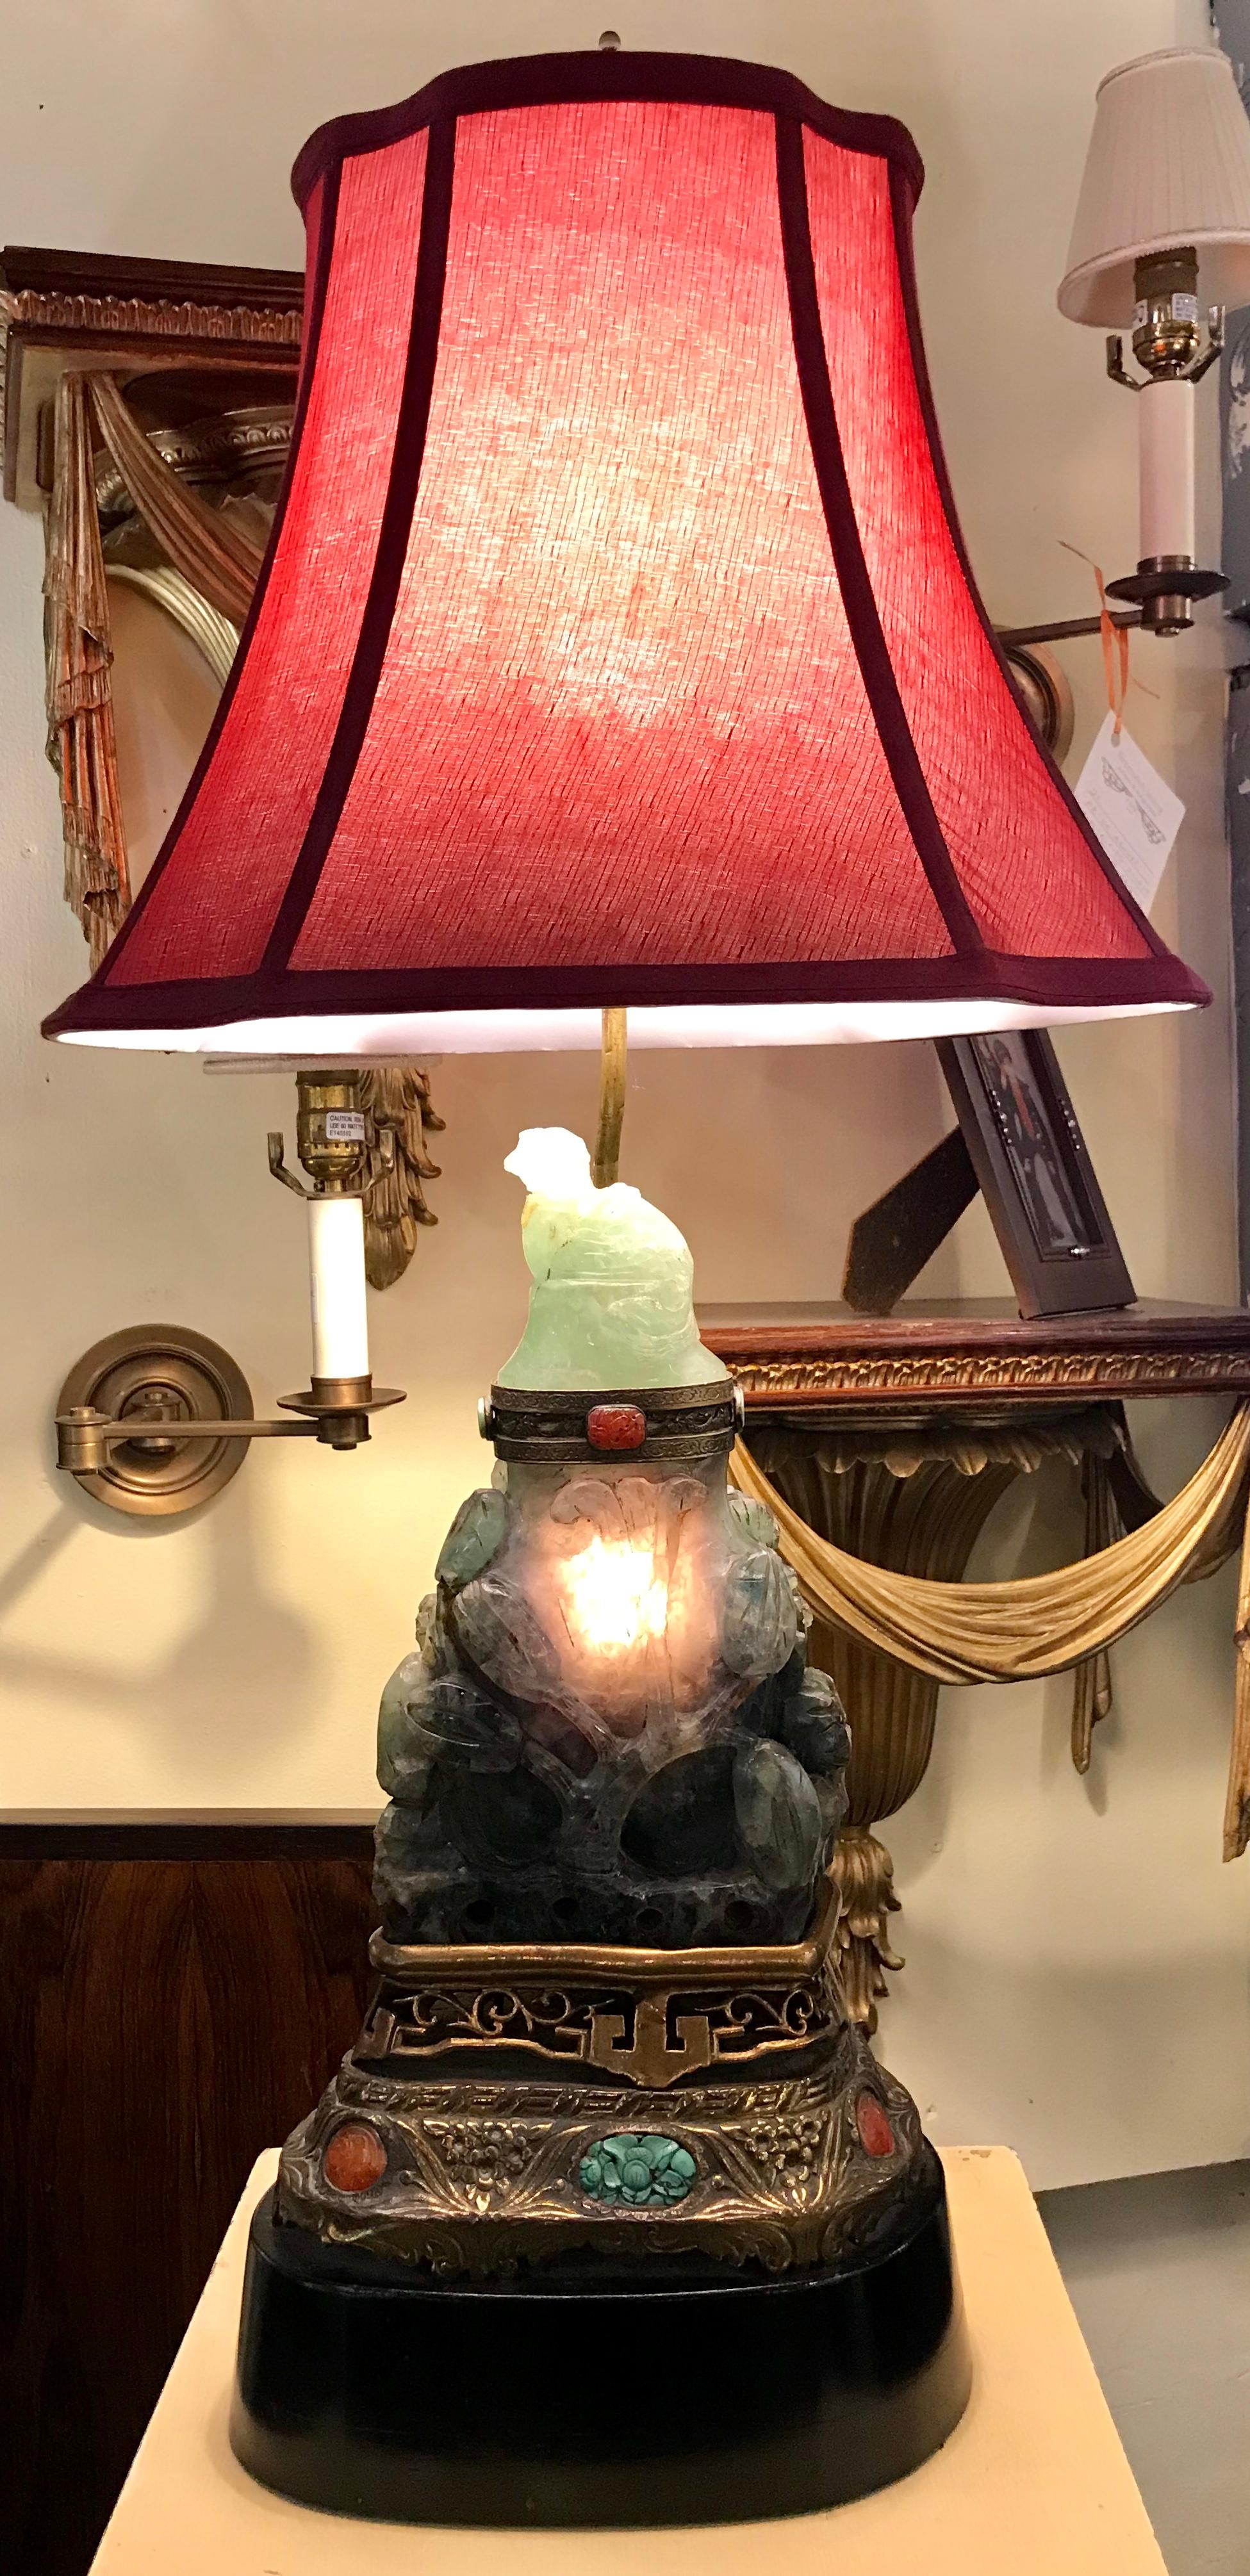 A wonderful early 20th century fluorite Lamp having a double bulb light on top and a double bulb lighted interior on a marble base.